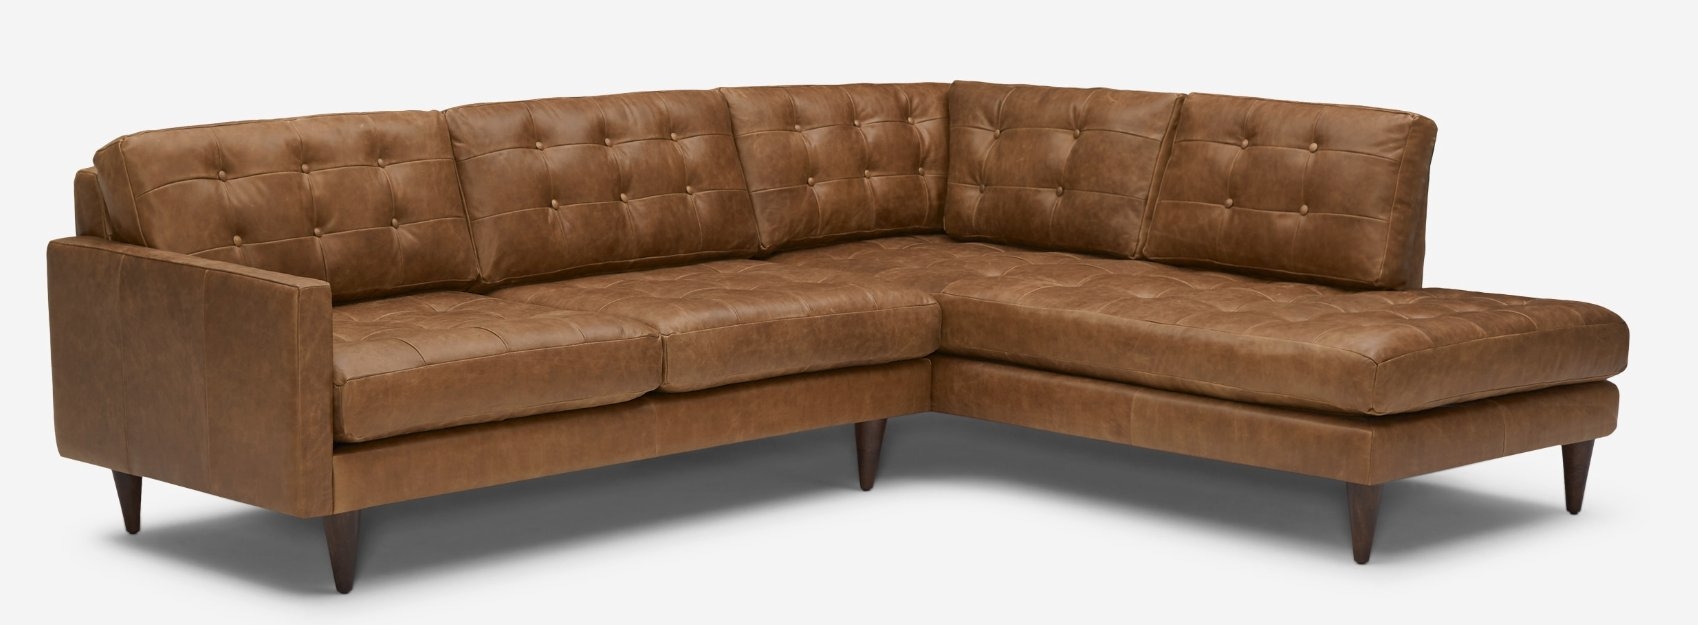 Eliot Leather Sectional with Bumper - Right Arm Orientation - in Santiago Ale with Mocha Wood Stain - Image 0